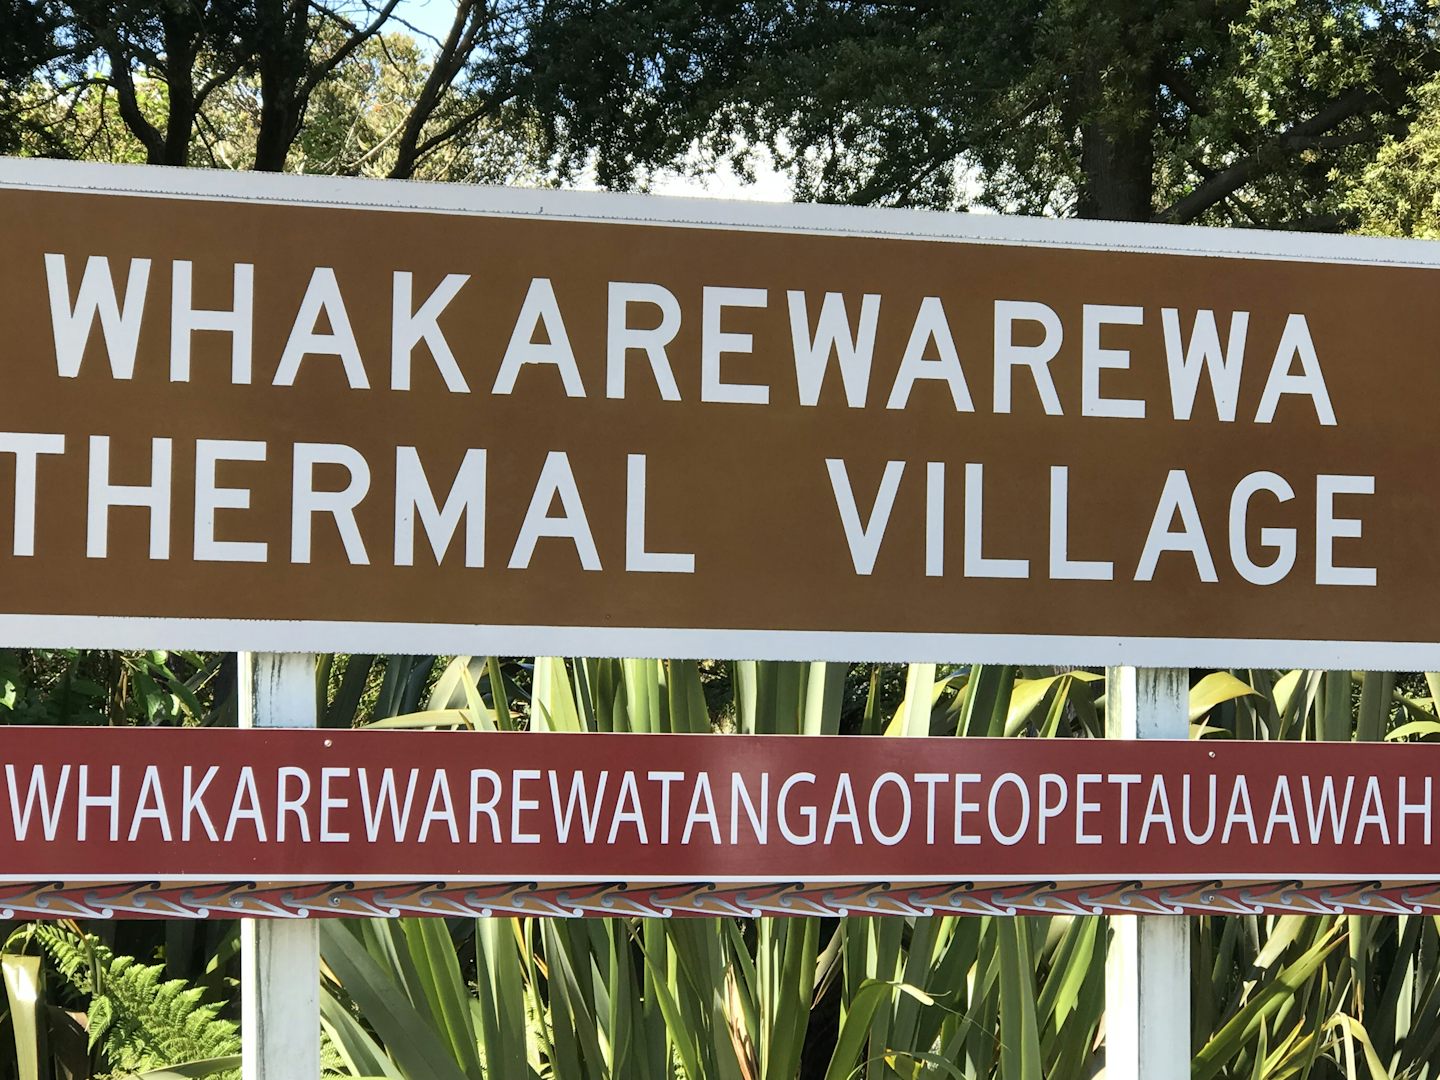 Visited a traditional Maori village and learned about the first settlers of